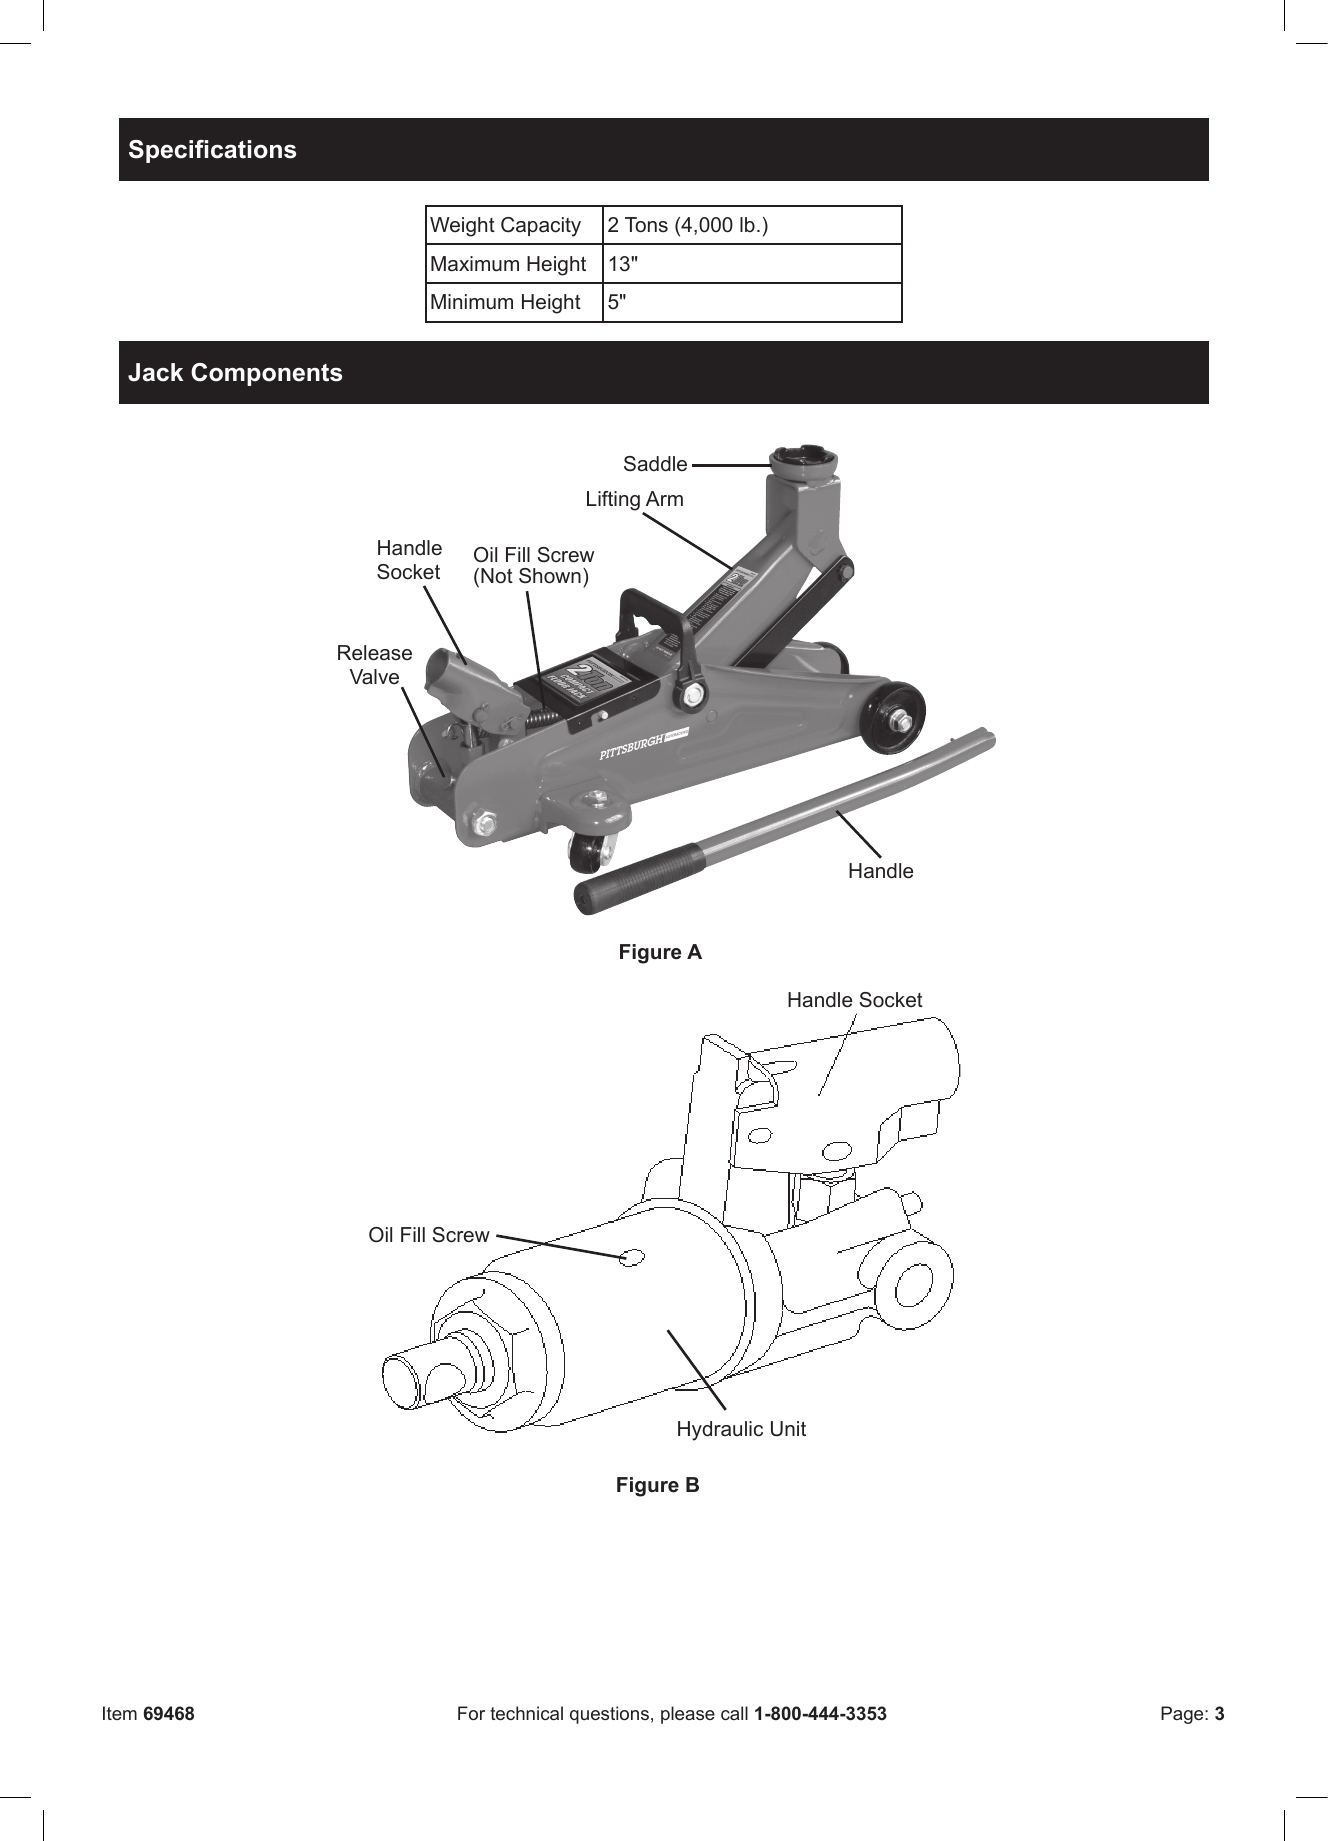 Page 3 of 8 - Harbor-Freight Harbor-Freight-69468-Owner-S-Manual